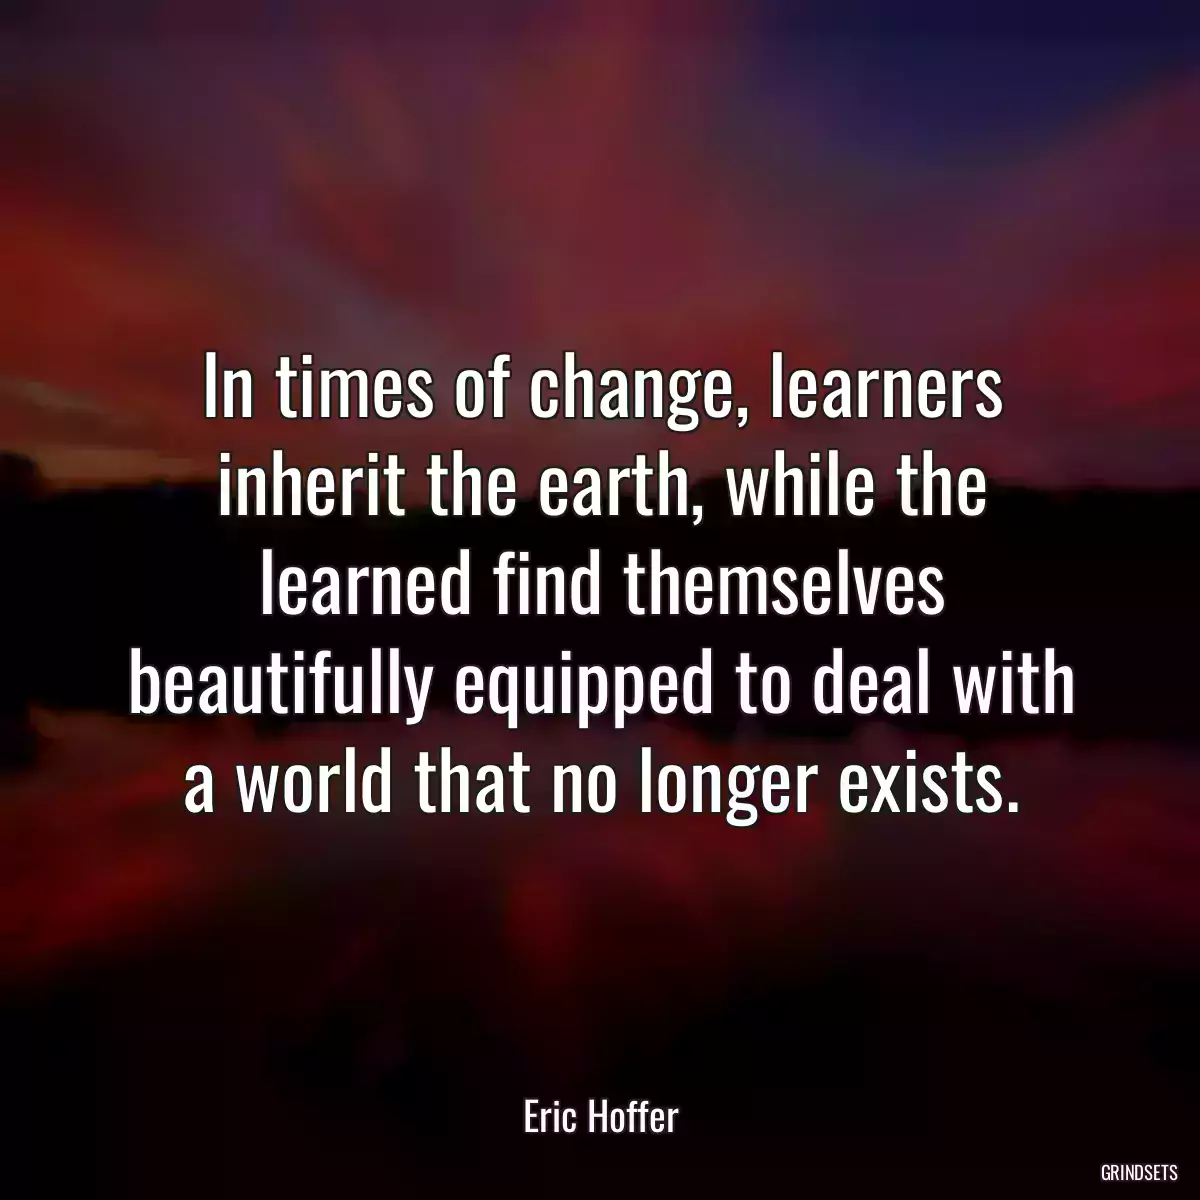 In times of change, learners inherit the earth, while the learned find themselves beautifully equipped to deal with a world that no longer exists.